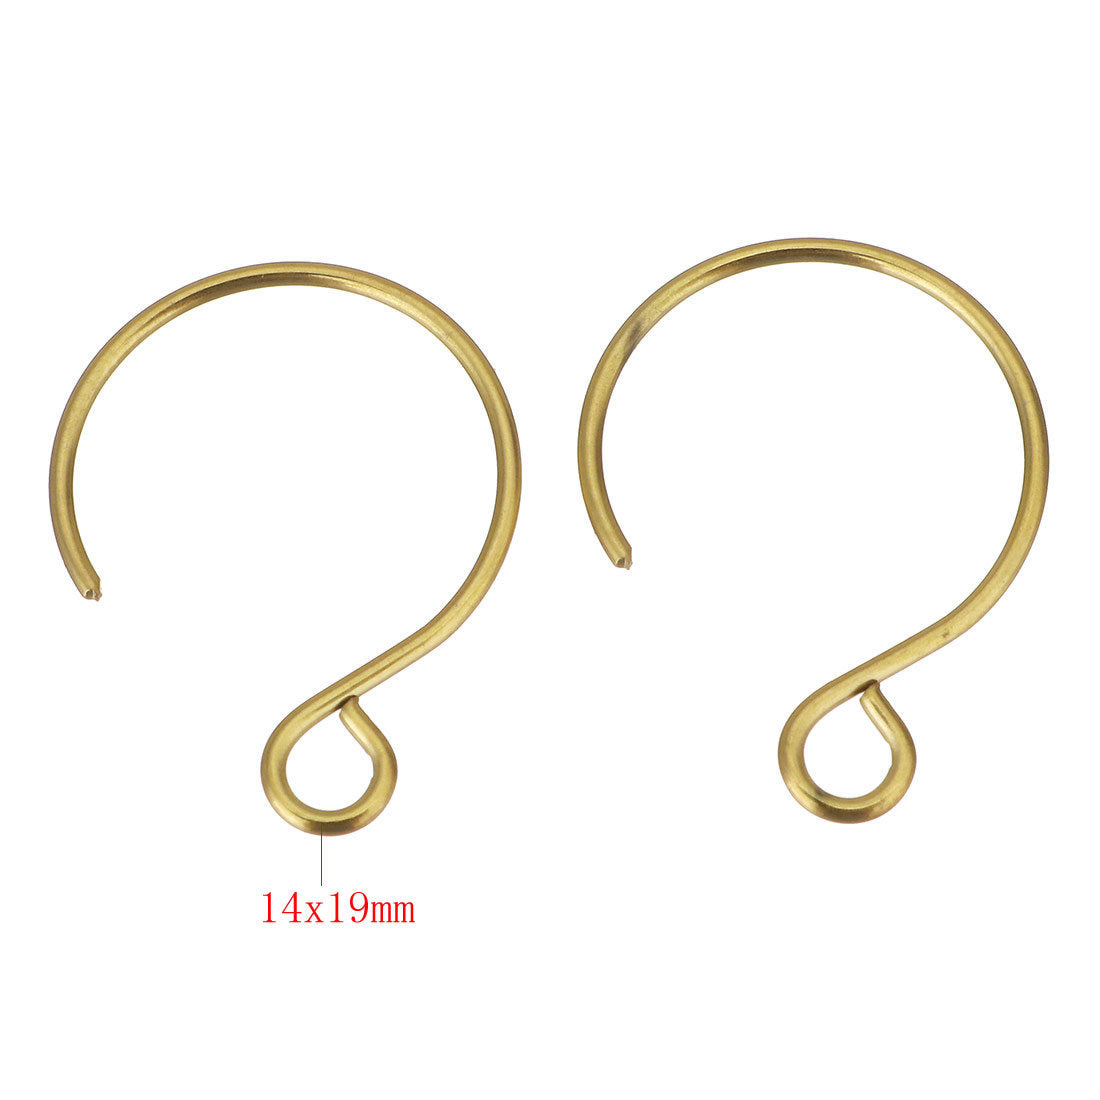 10 Stainless steel round earring hooks - Rose gold, gold, silver or black